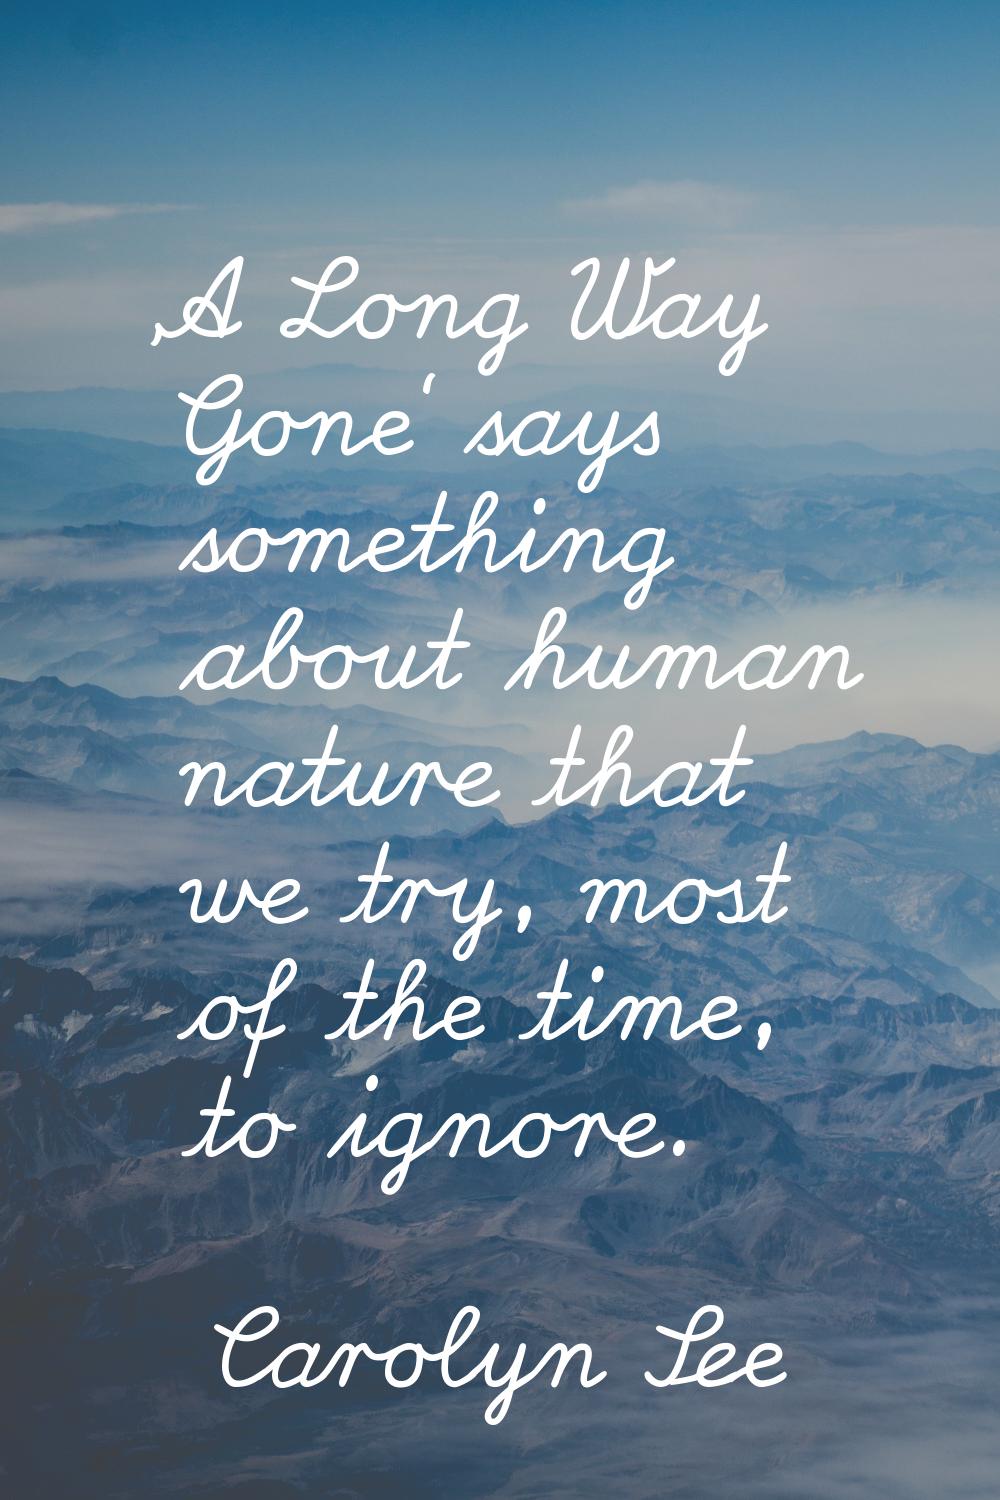 'A Long Way Gone' says something about human nature that we try, most of the time, to ignore.